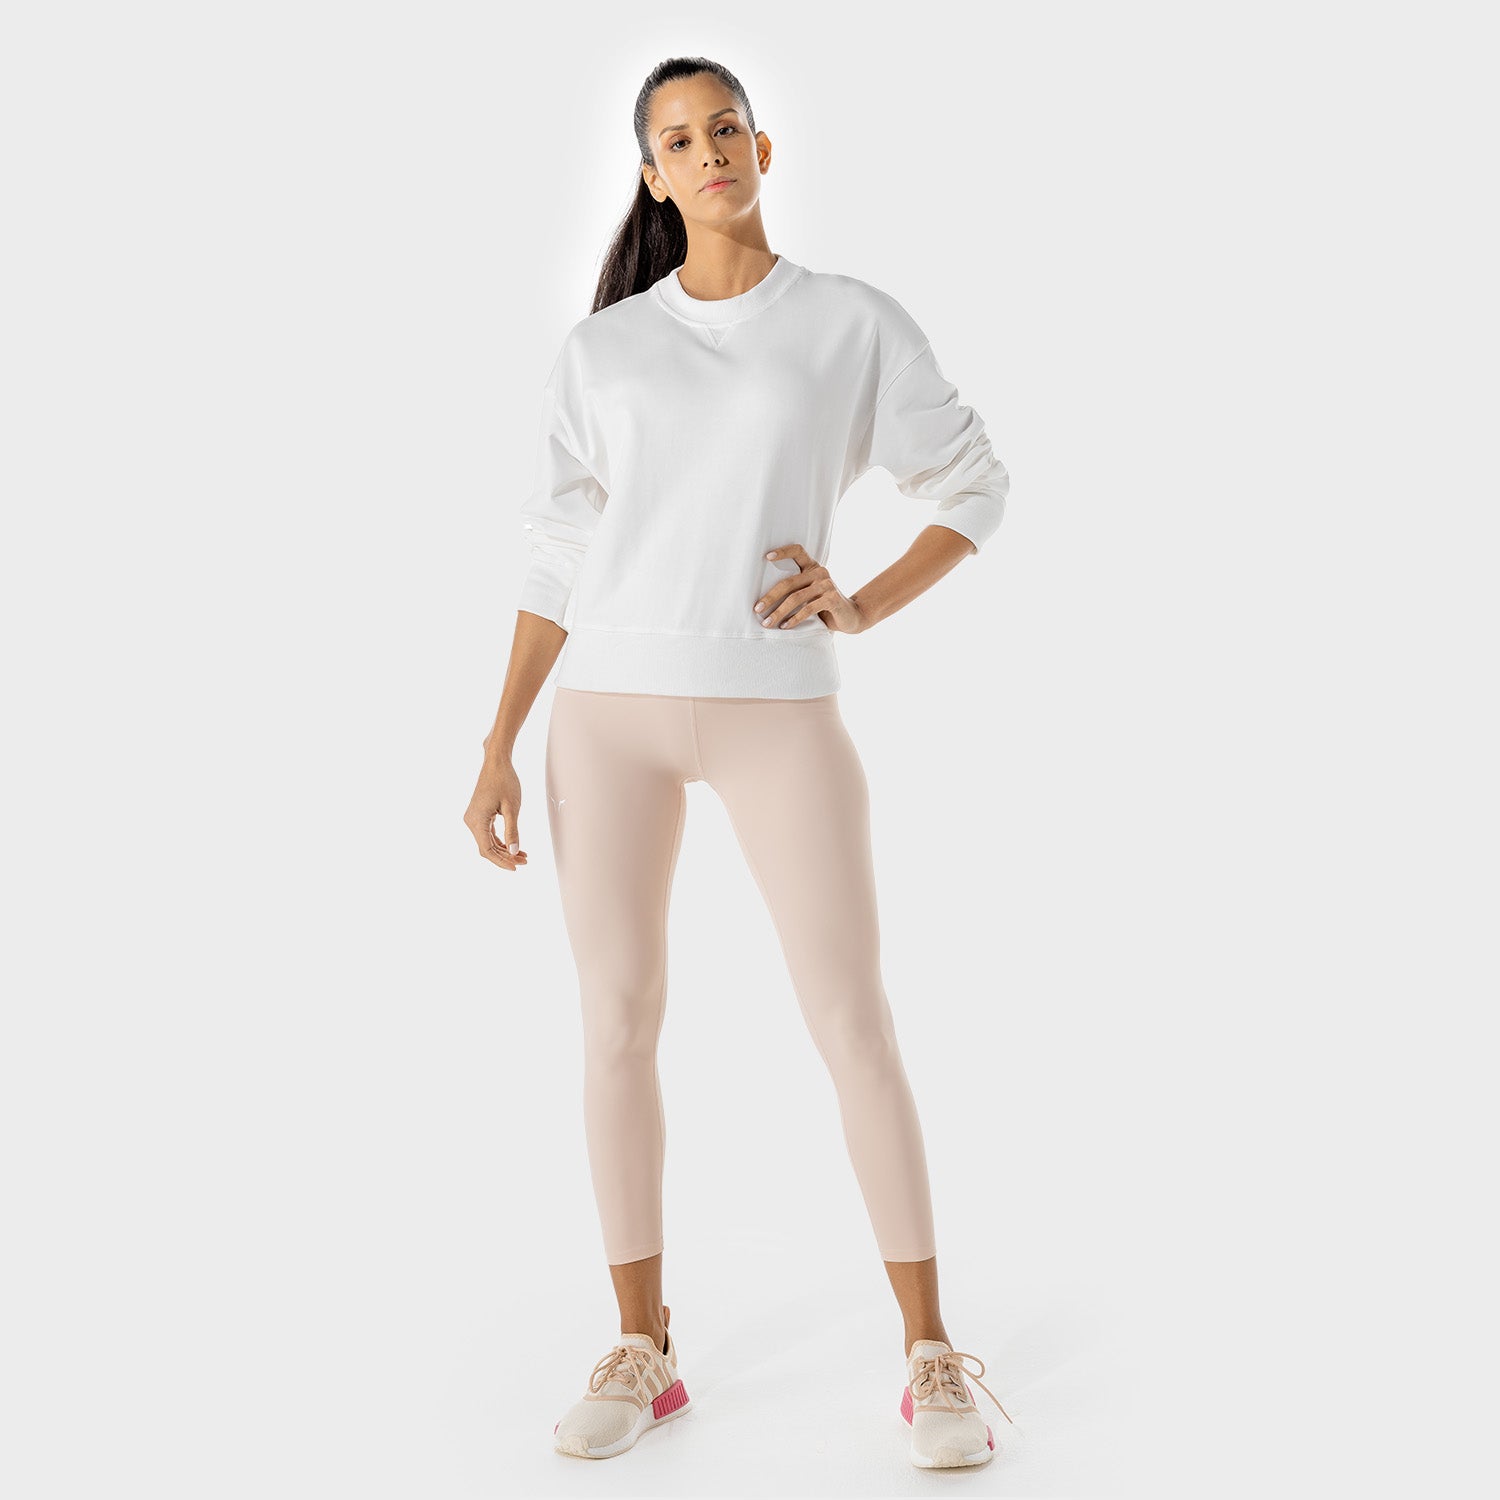 squatwolf-workout-clothes-womens-fitness-sweatshirt-white-gym-t-shirts